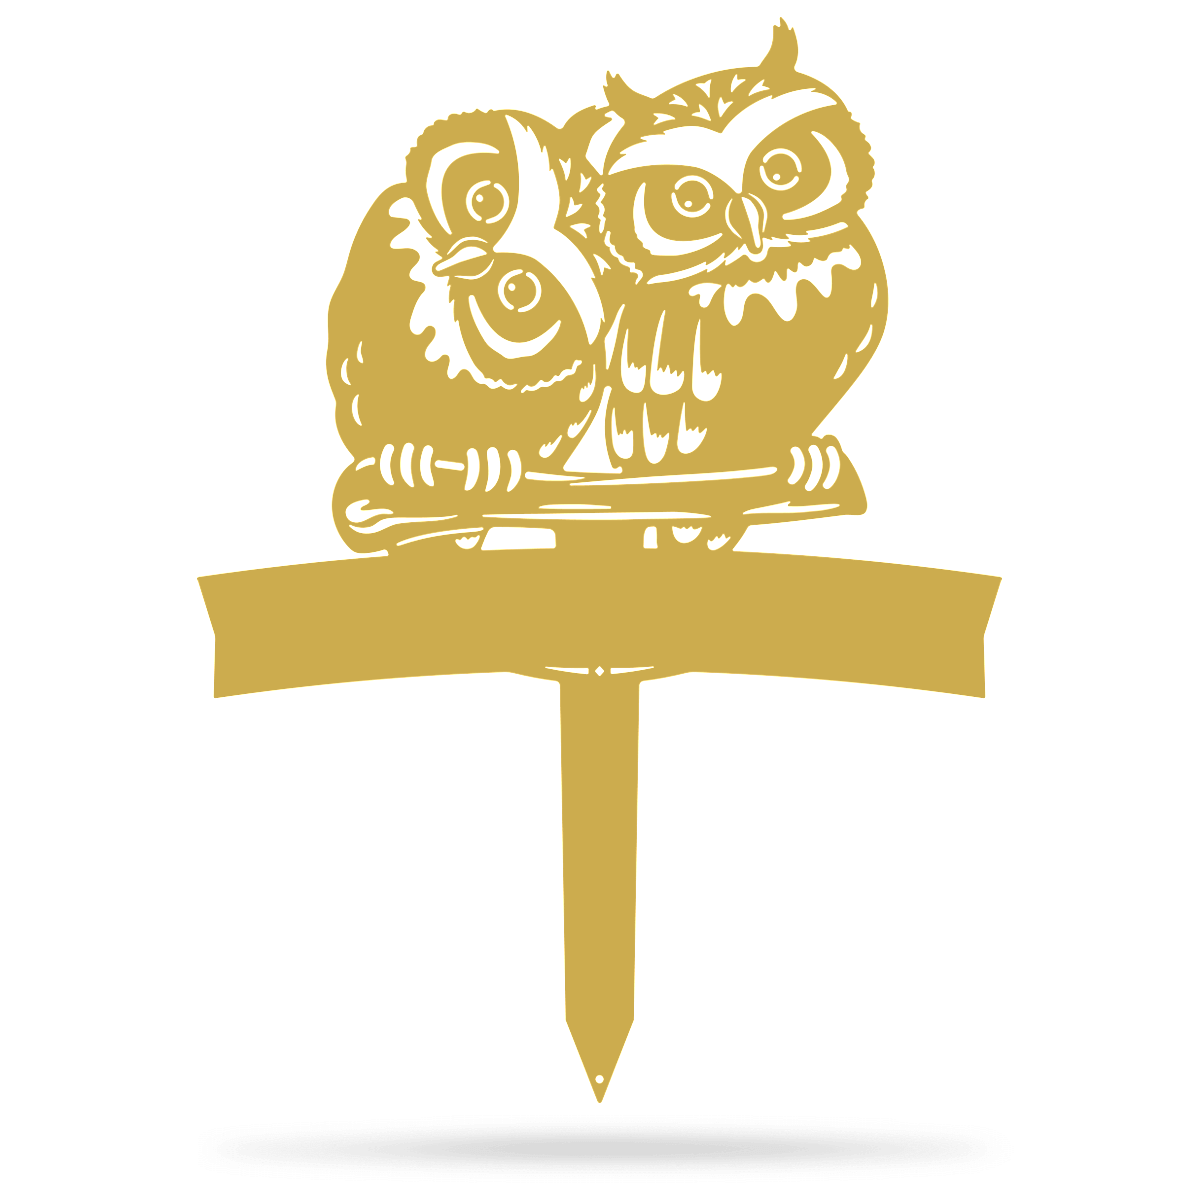 A sharp owl logo in gold, wings spread conveying wisdom on Craiyon